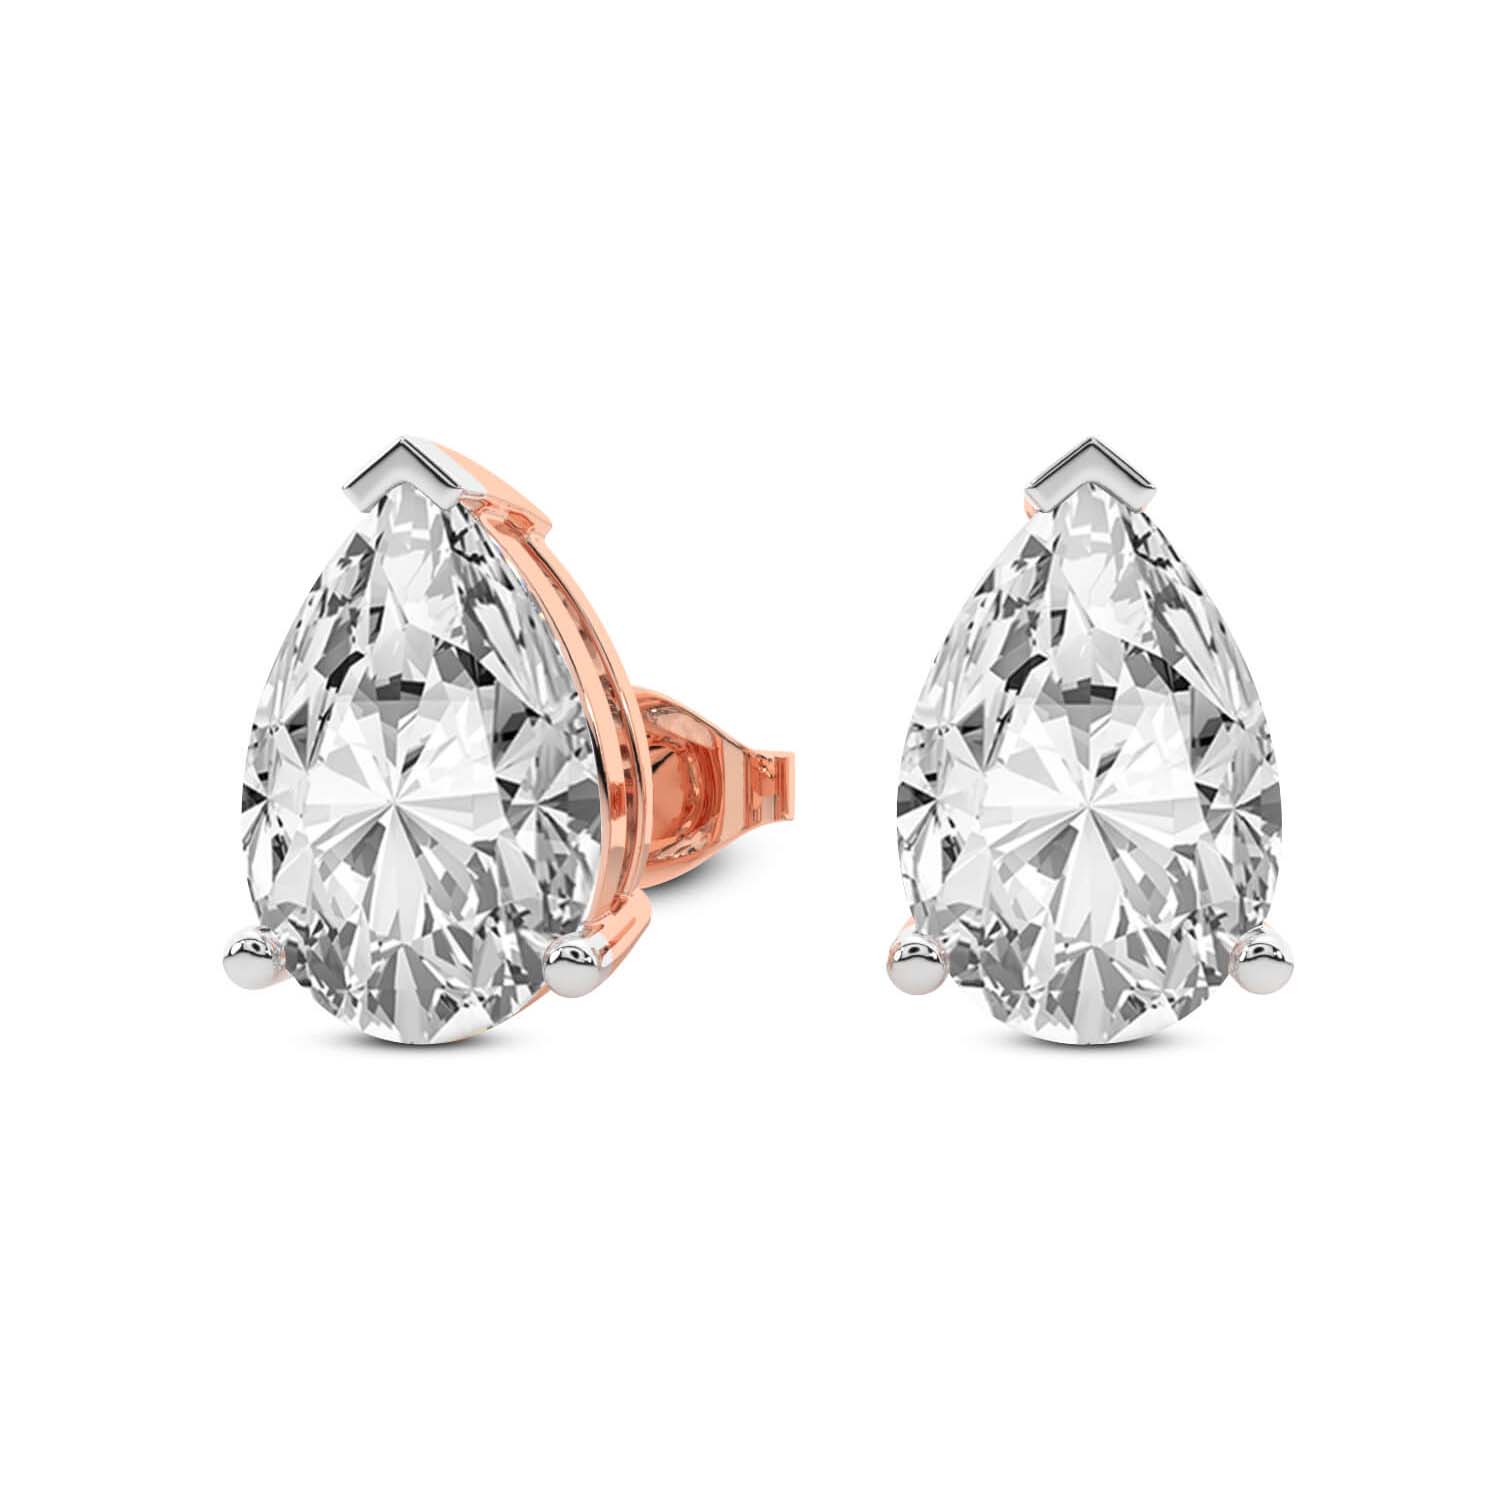 3 Prong Pear Lab Diamond Stud Earrings rose gold earring, small right view